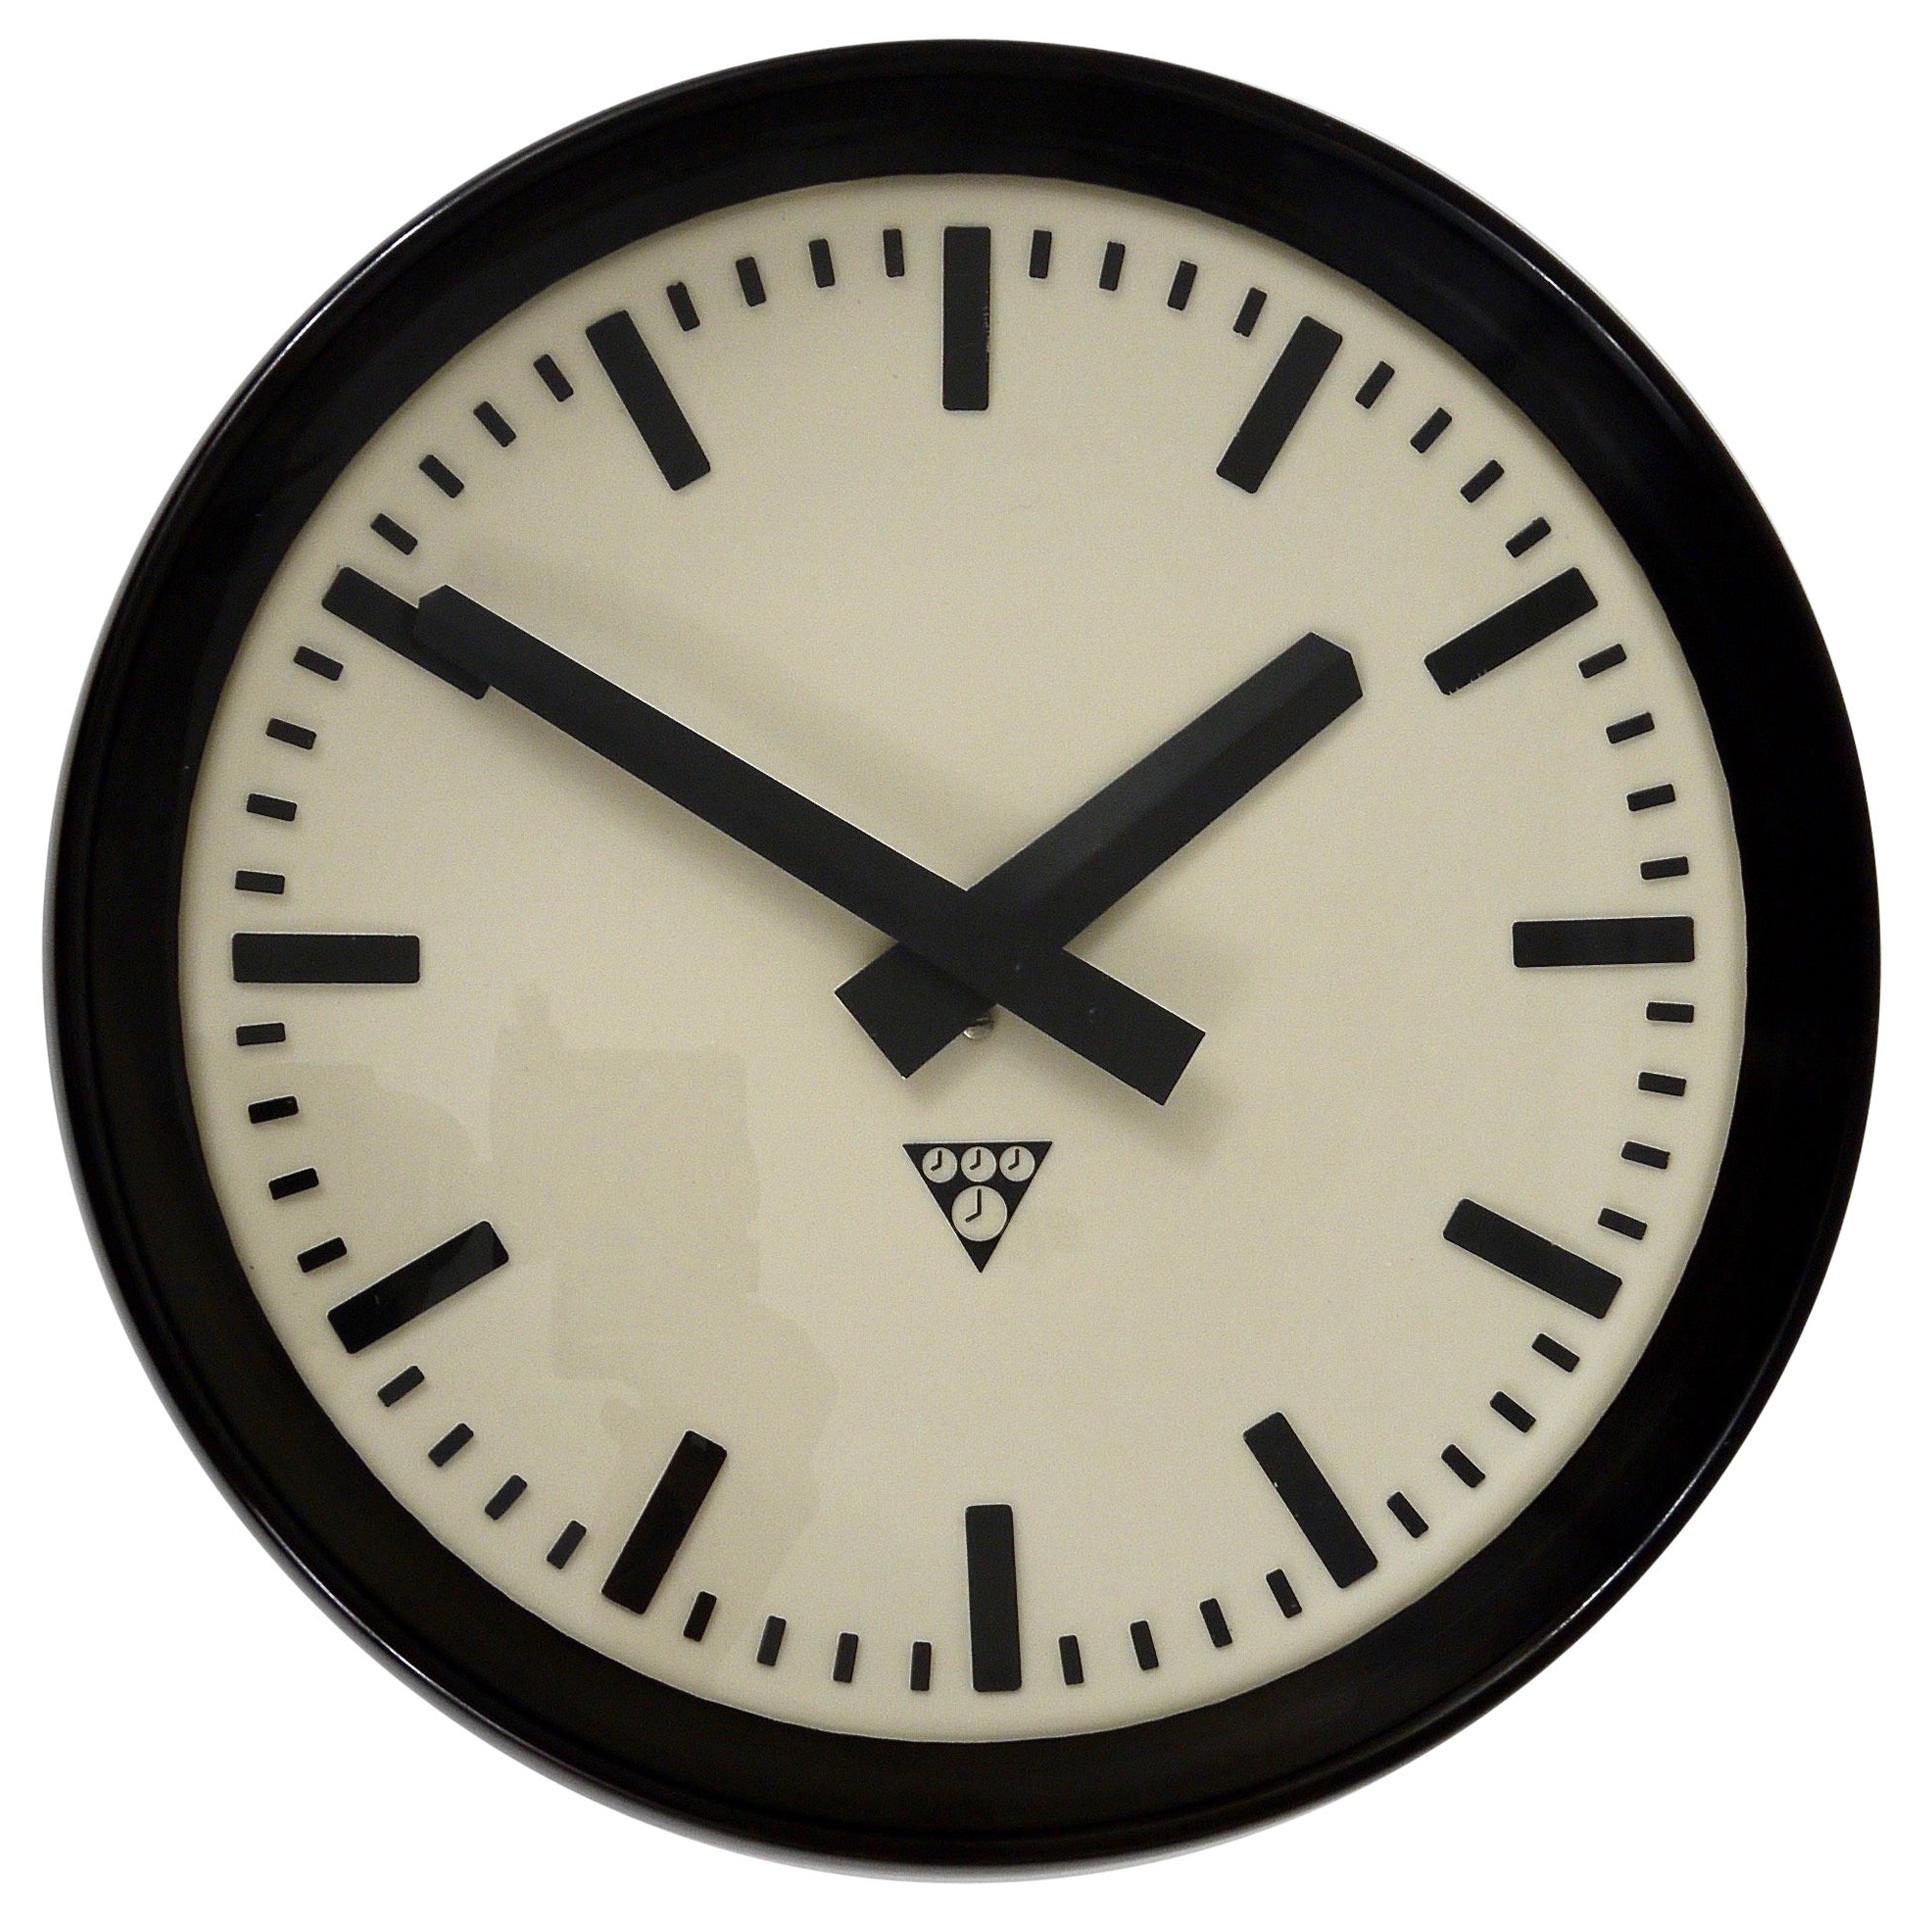 Bakelite Industrial Factory or Train Station Wall Clock from the 1940s